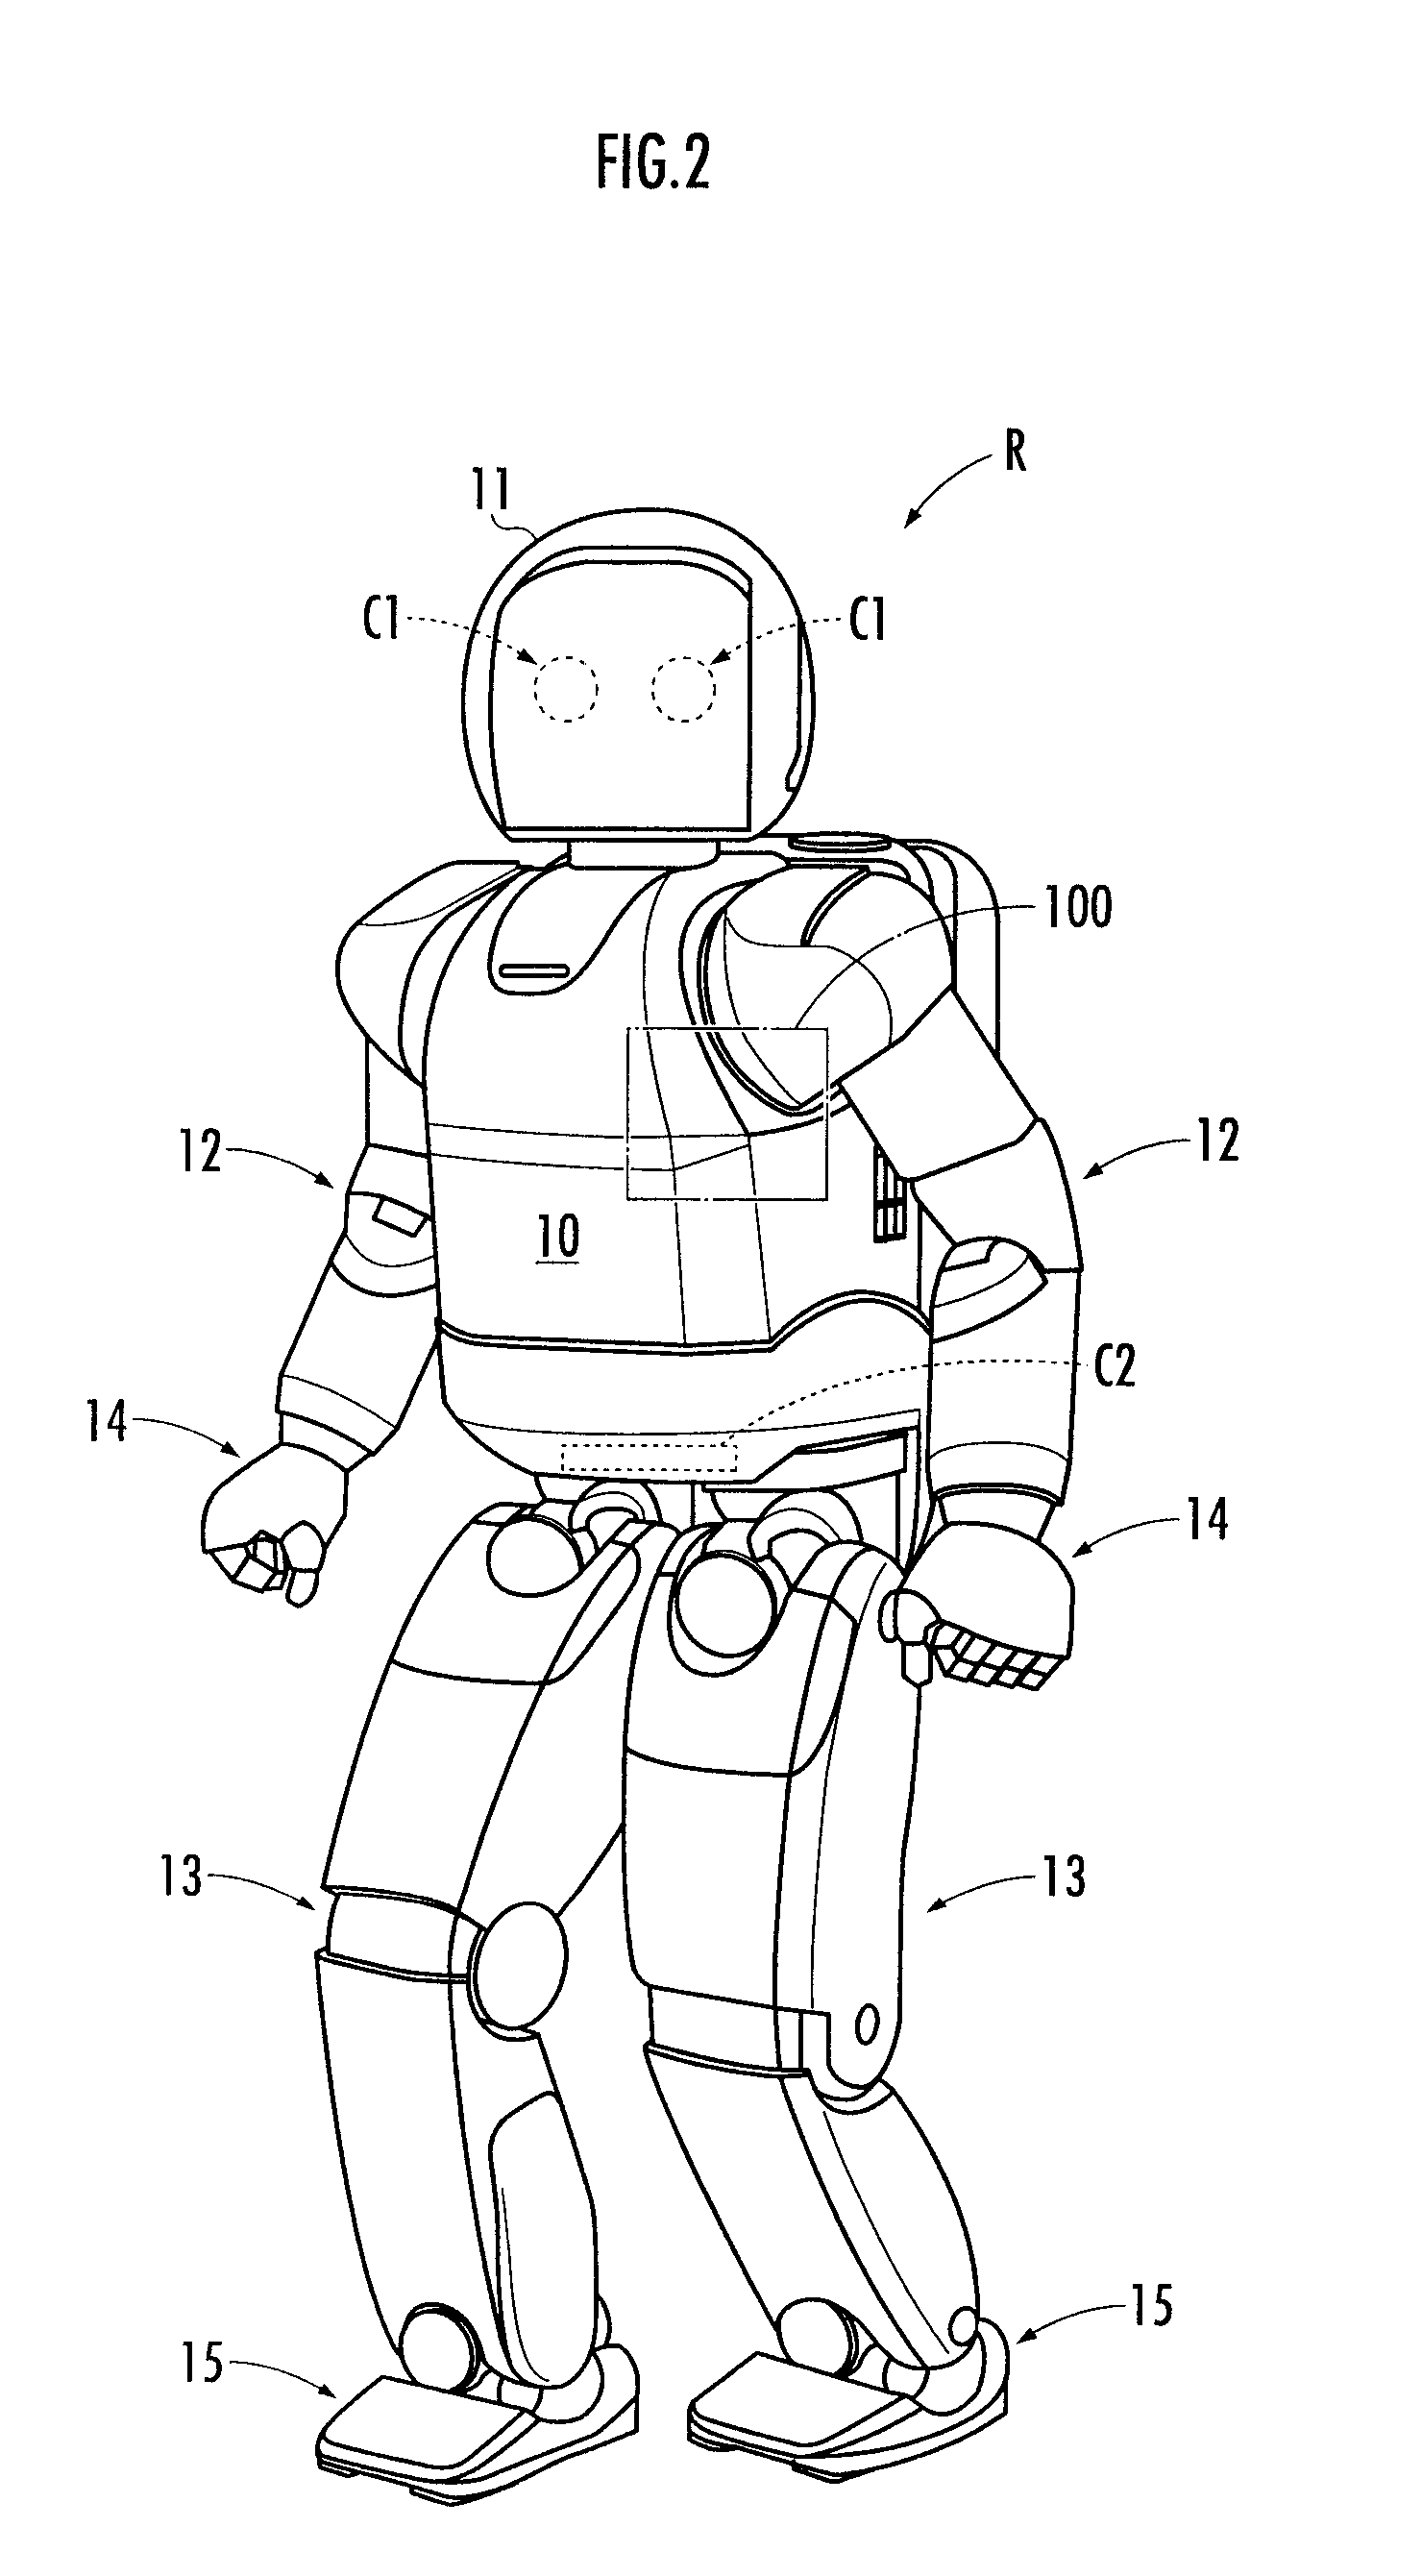 Robot and task execution system